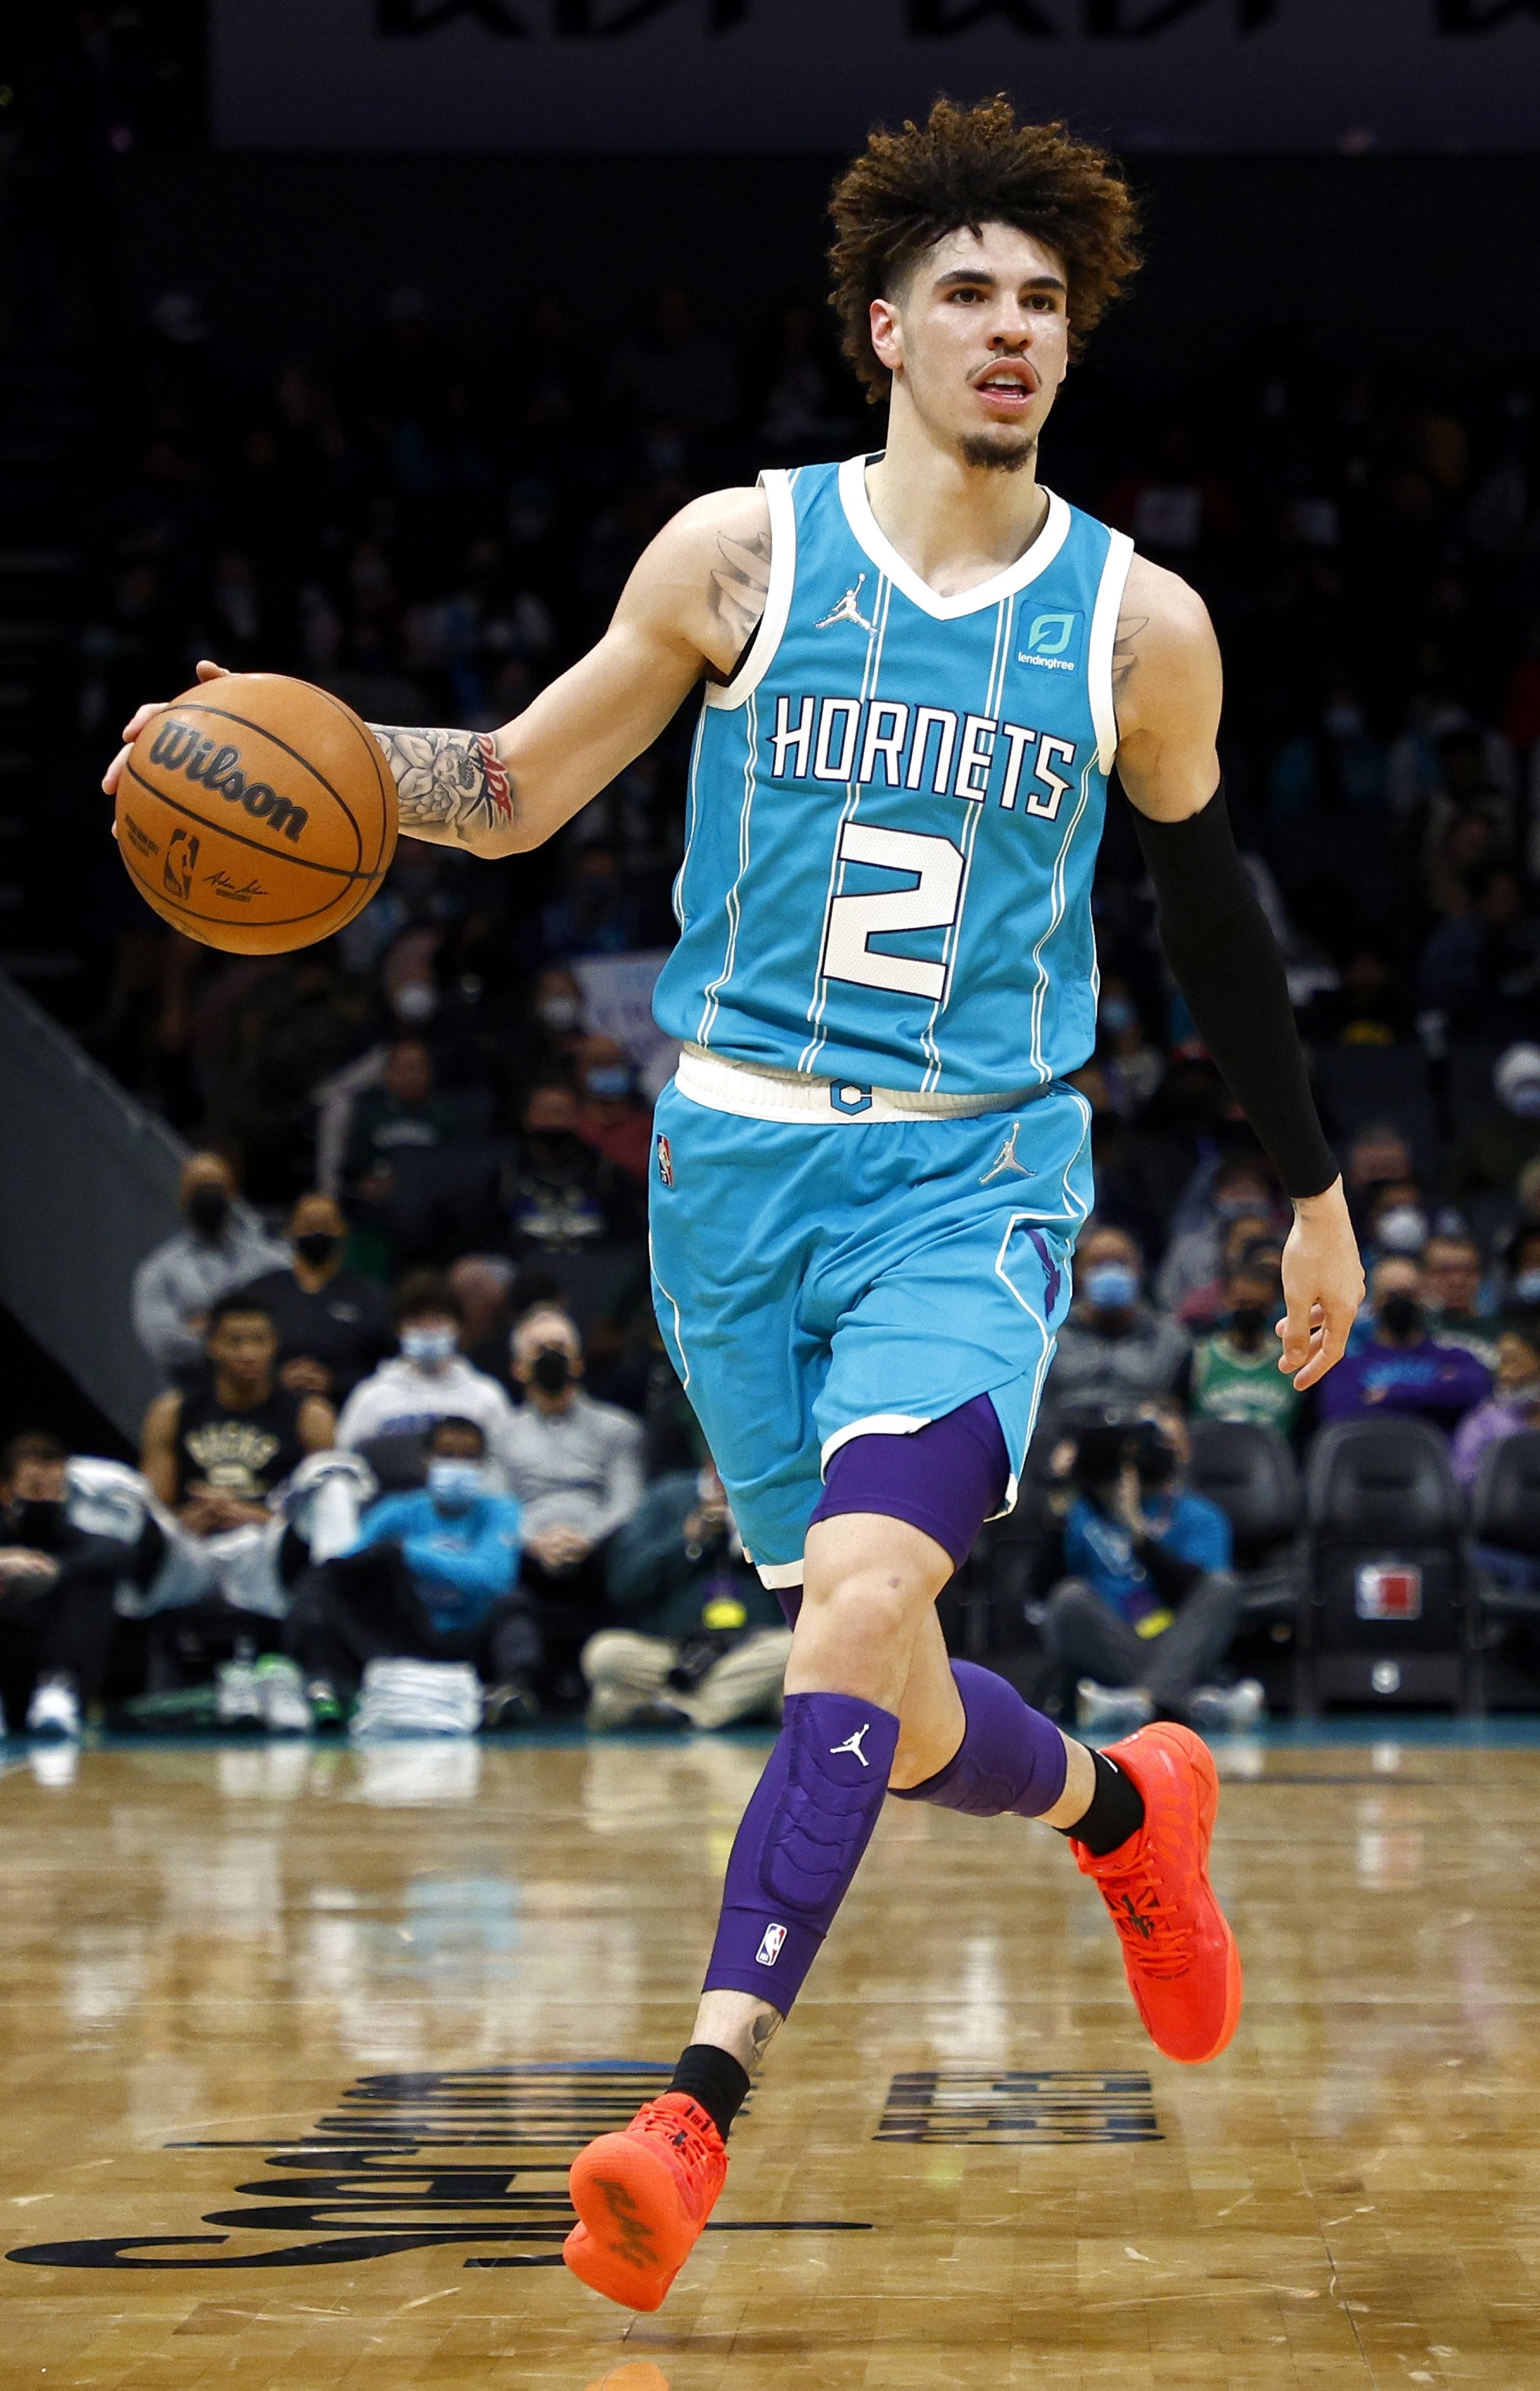 Charlotte Hornets' LaMelo Ball brings the ball up court during an NBA game against the Milwaukee Bucks, Charlotte, North Carolina, U.S., Jan. 10, 2022. (AFP Photo)